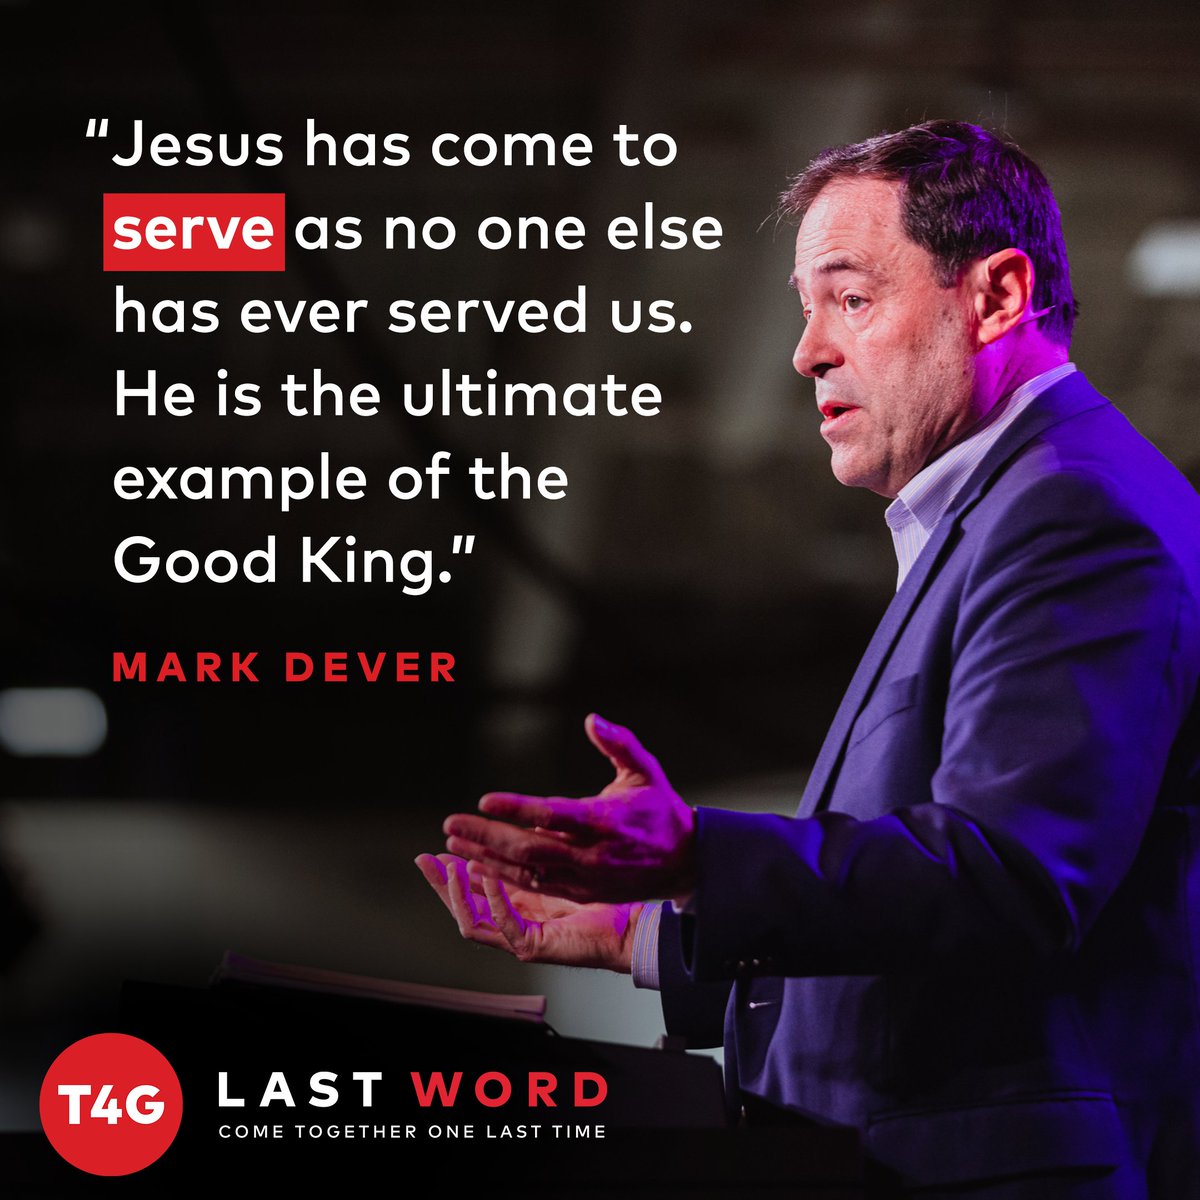 'Jesus has come to serve as no one else has ever served us. He is the ultimate example of the Good King.' — @MarkDever at #T4G22